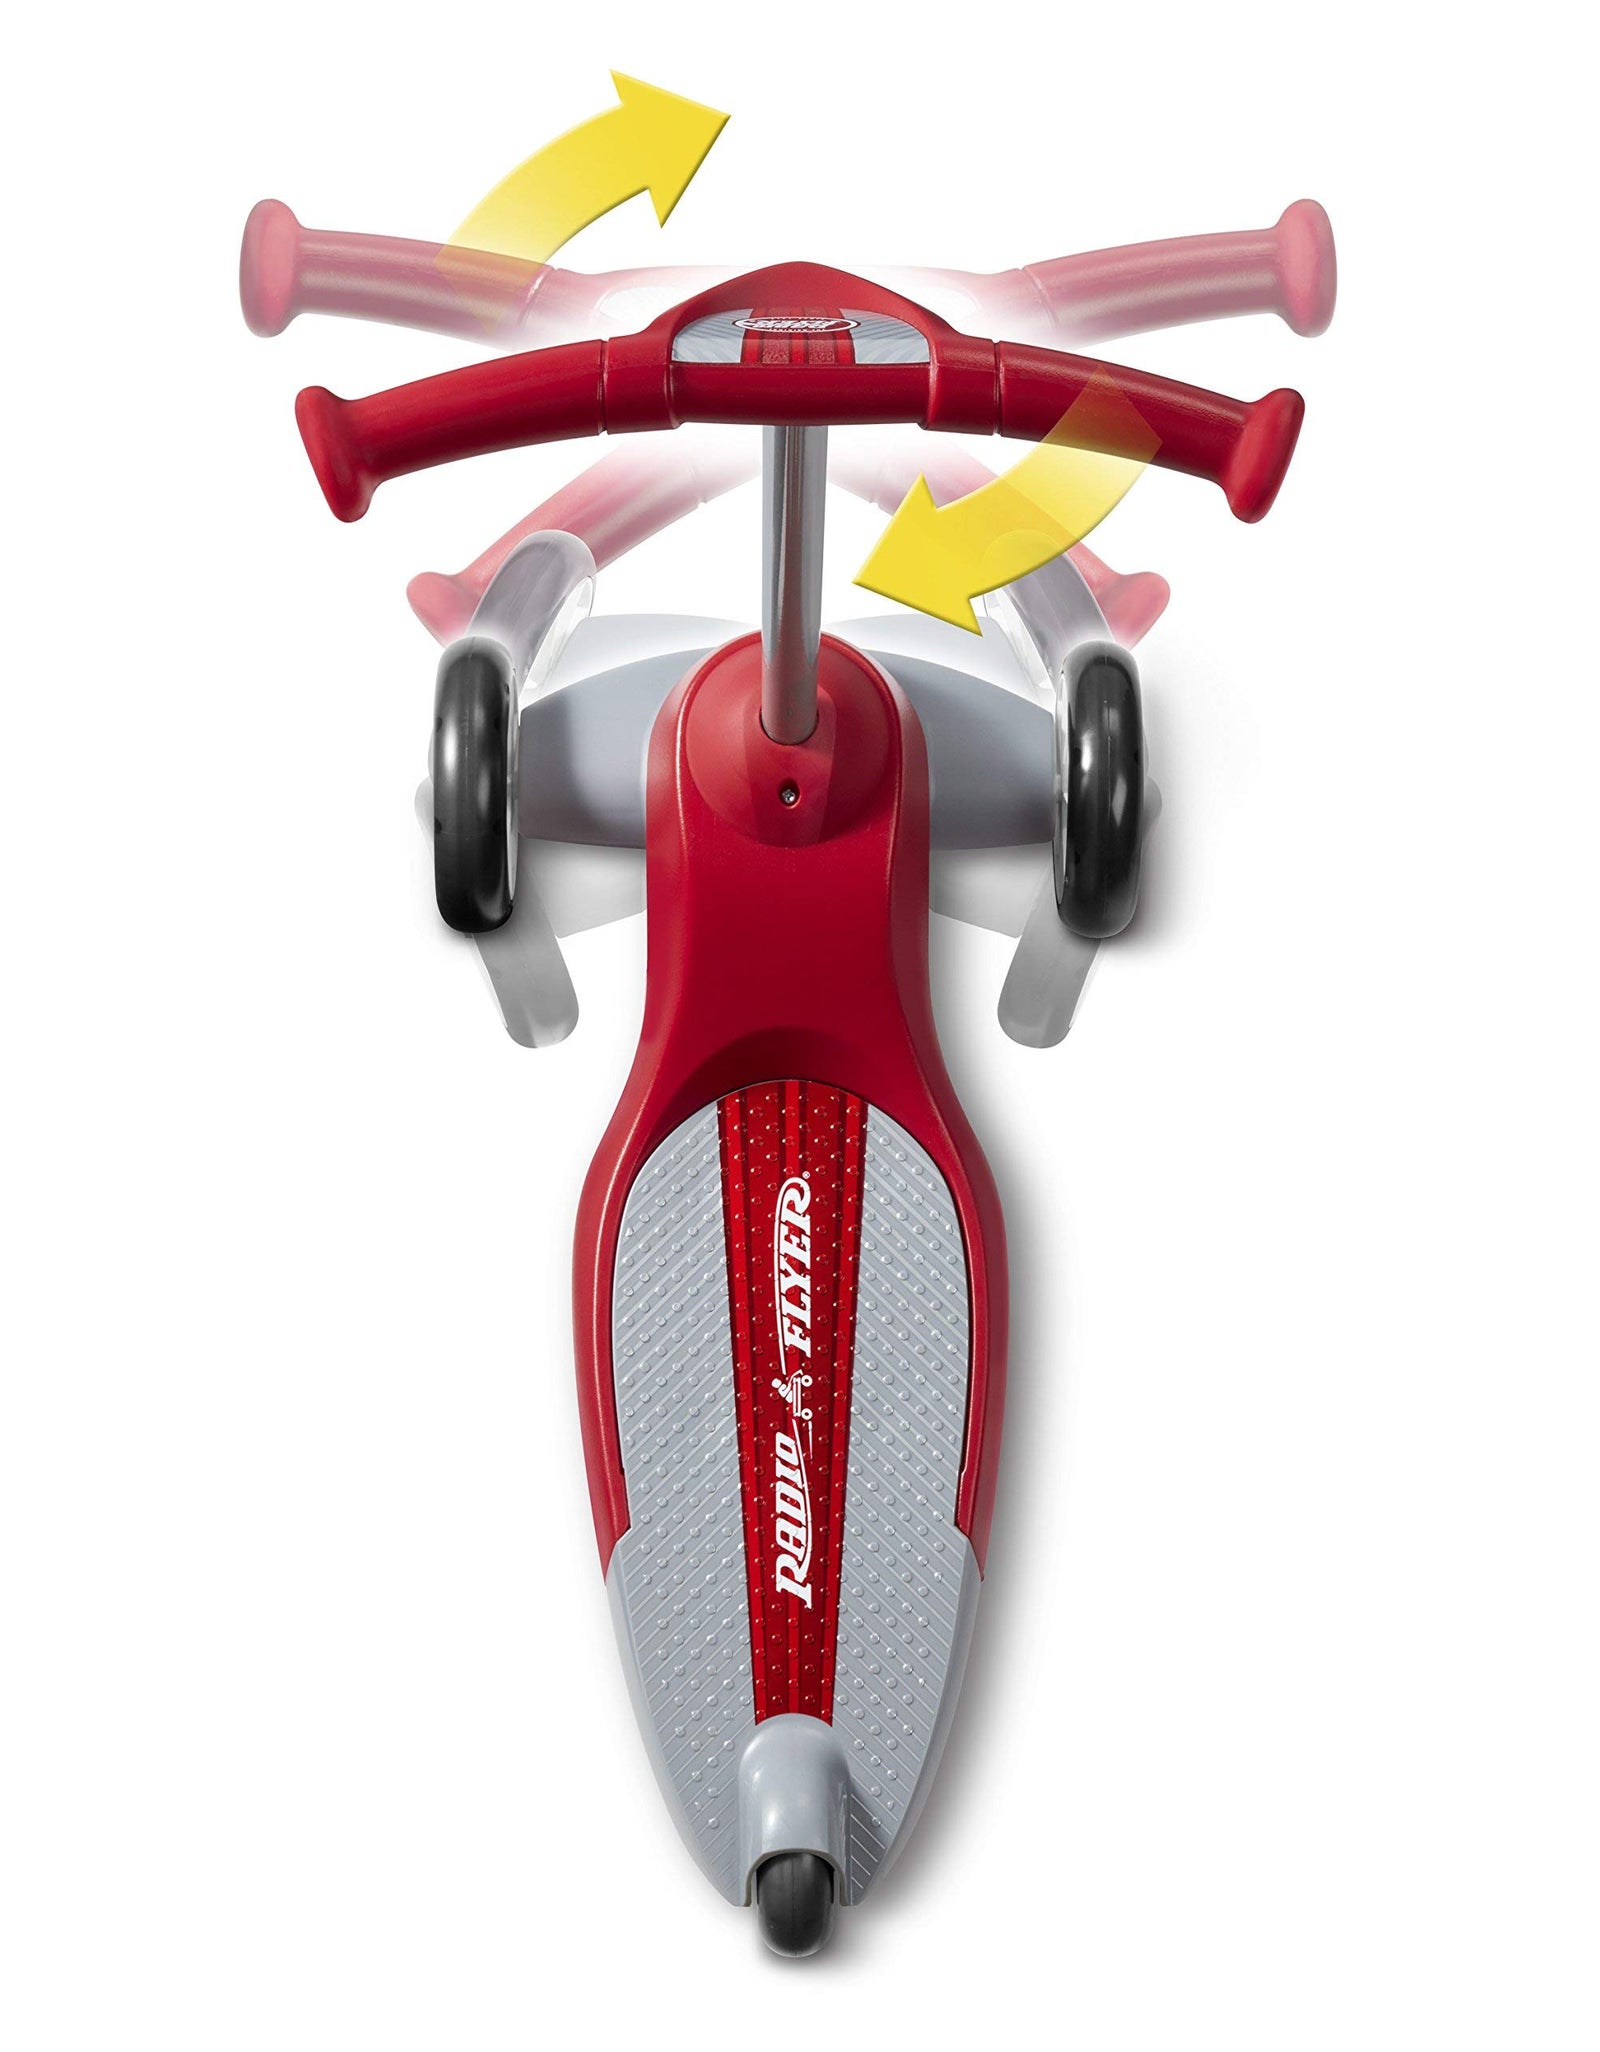 Radio Flyer My 1st Scooter, toddler toy for ages 2-5 (Amazon Exclusive)